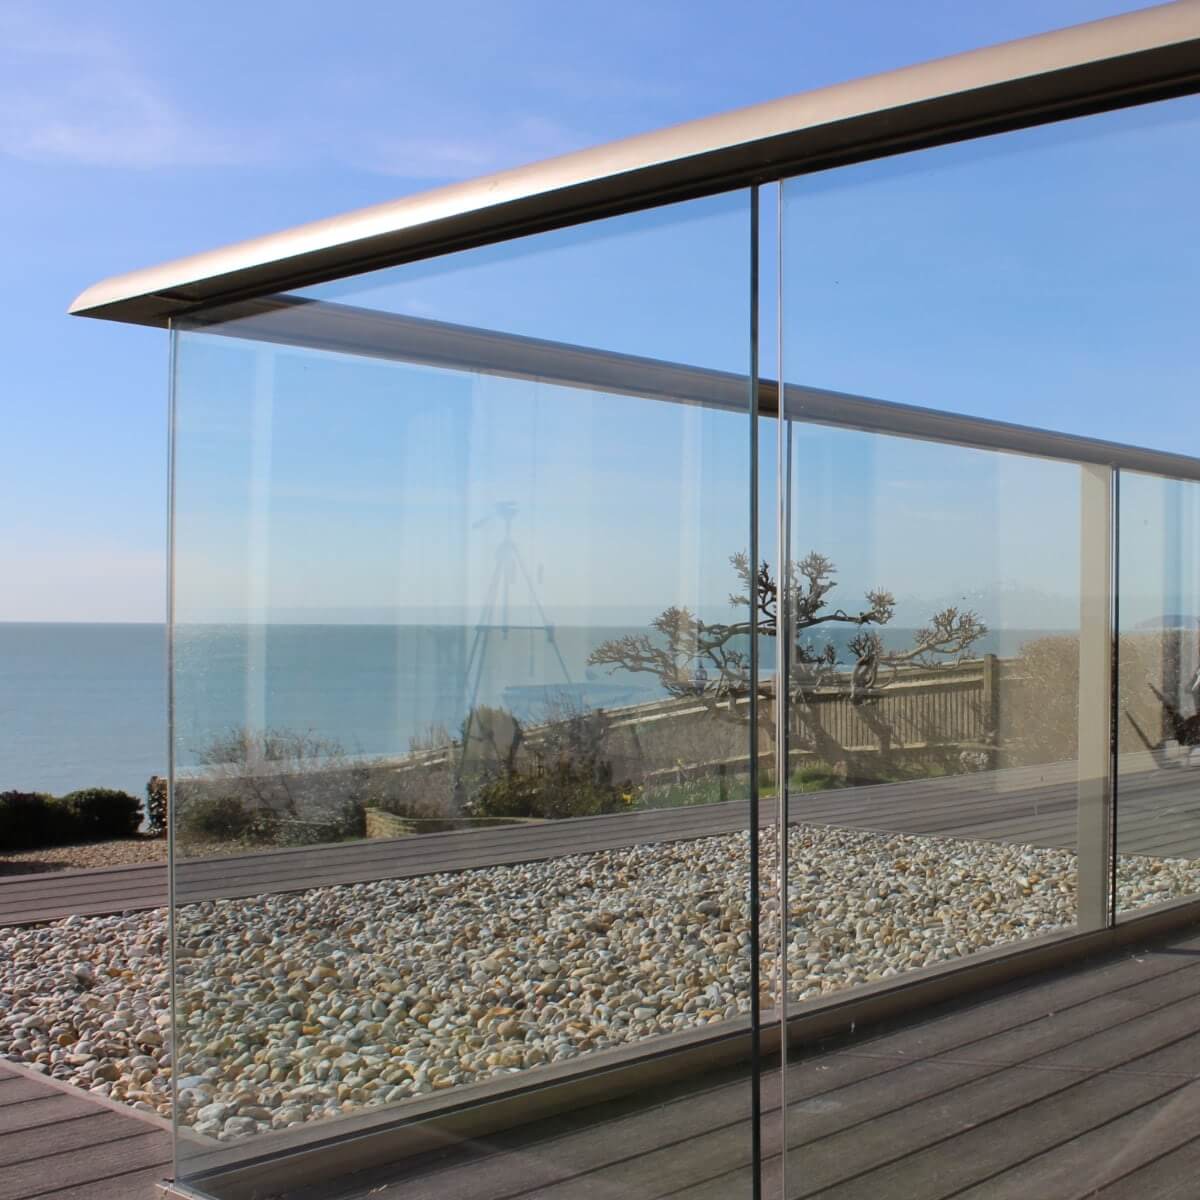 Bricket Wood's Glass Balustrades Expert| Elegant Safety & Style for Your Home